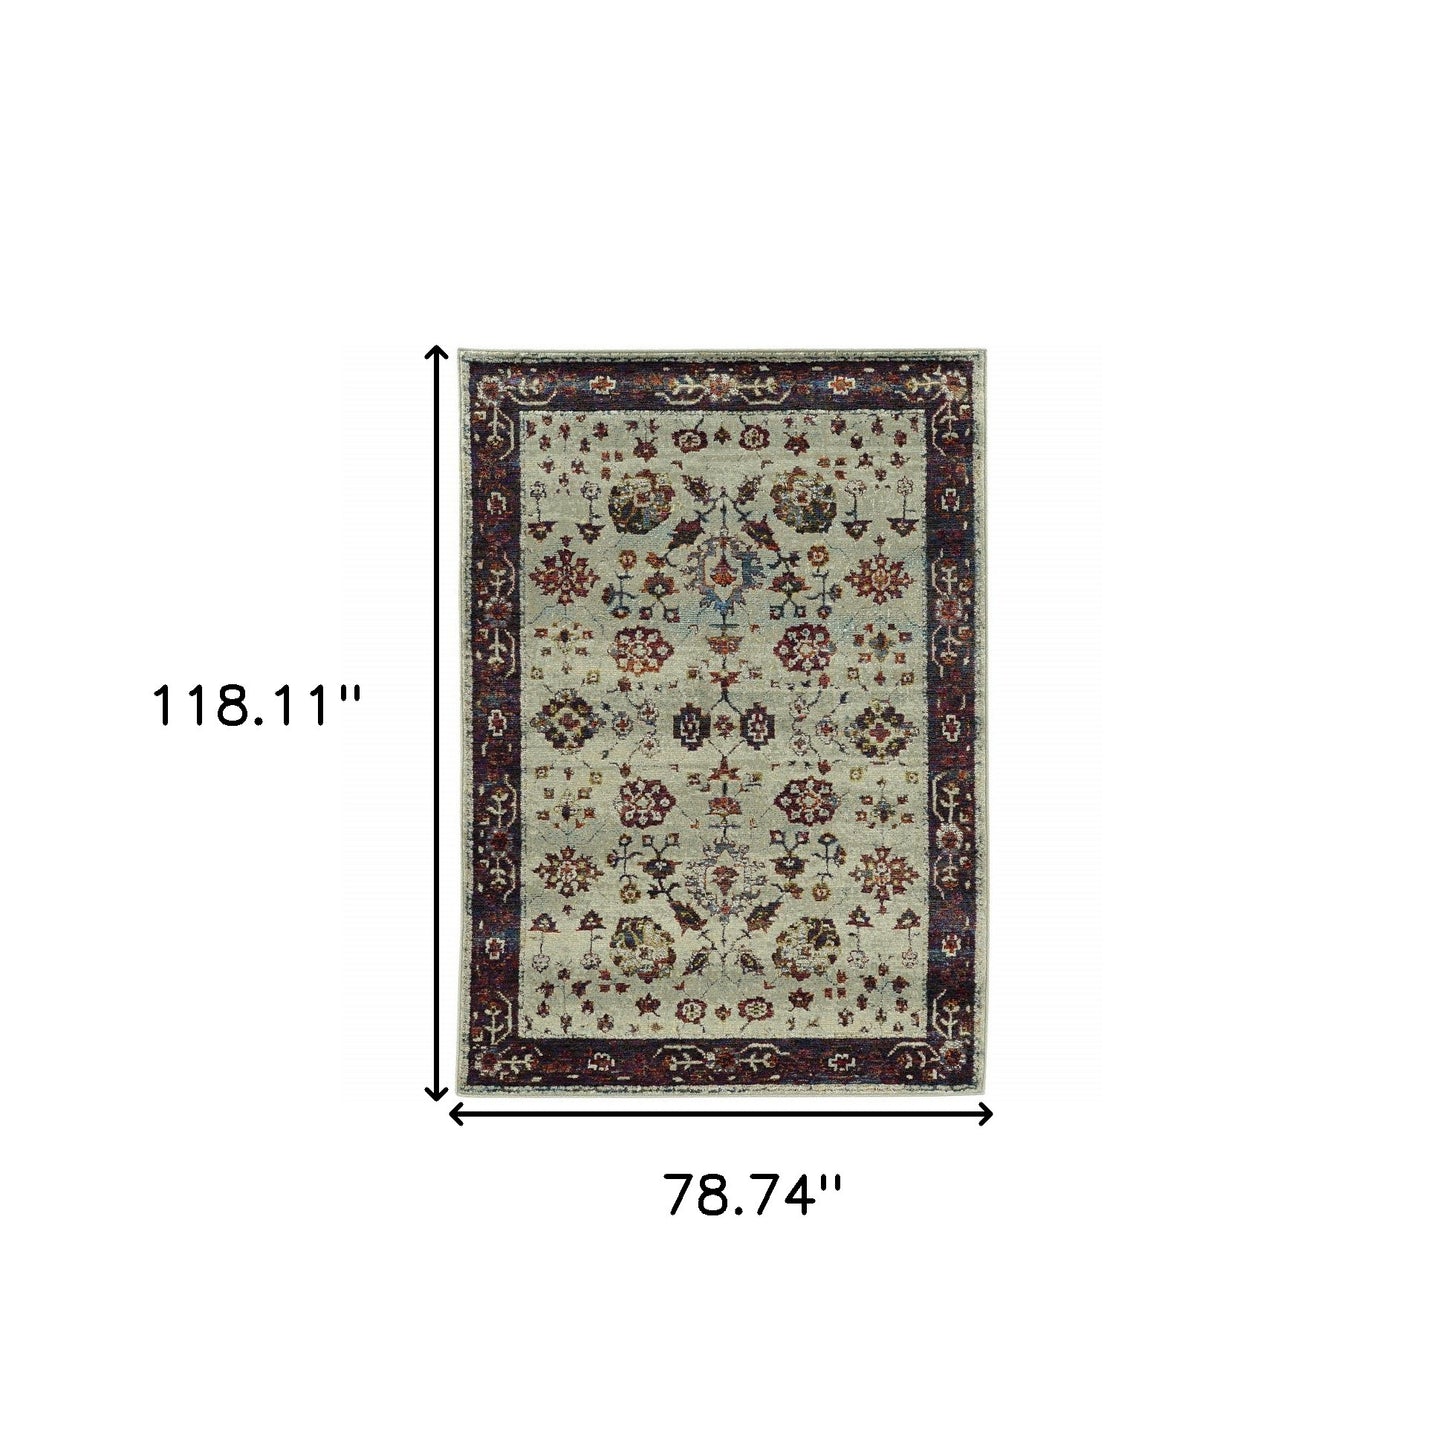 7' x 10' Red and Ivory Oriental Power Loom Area Rug